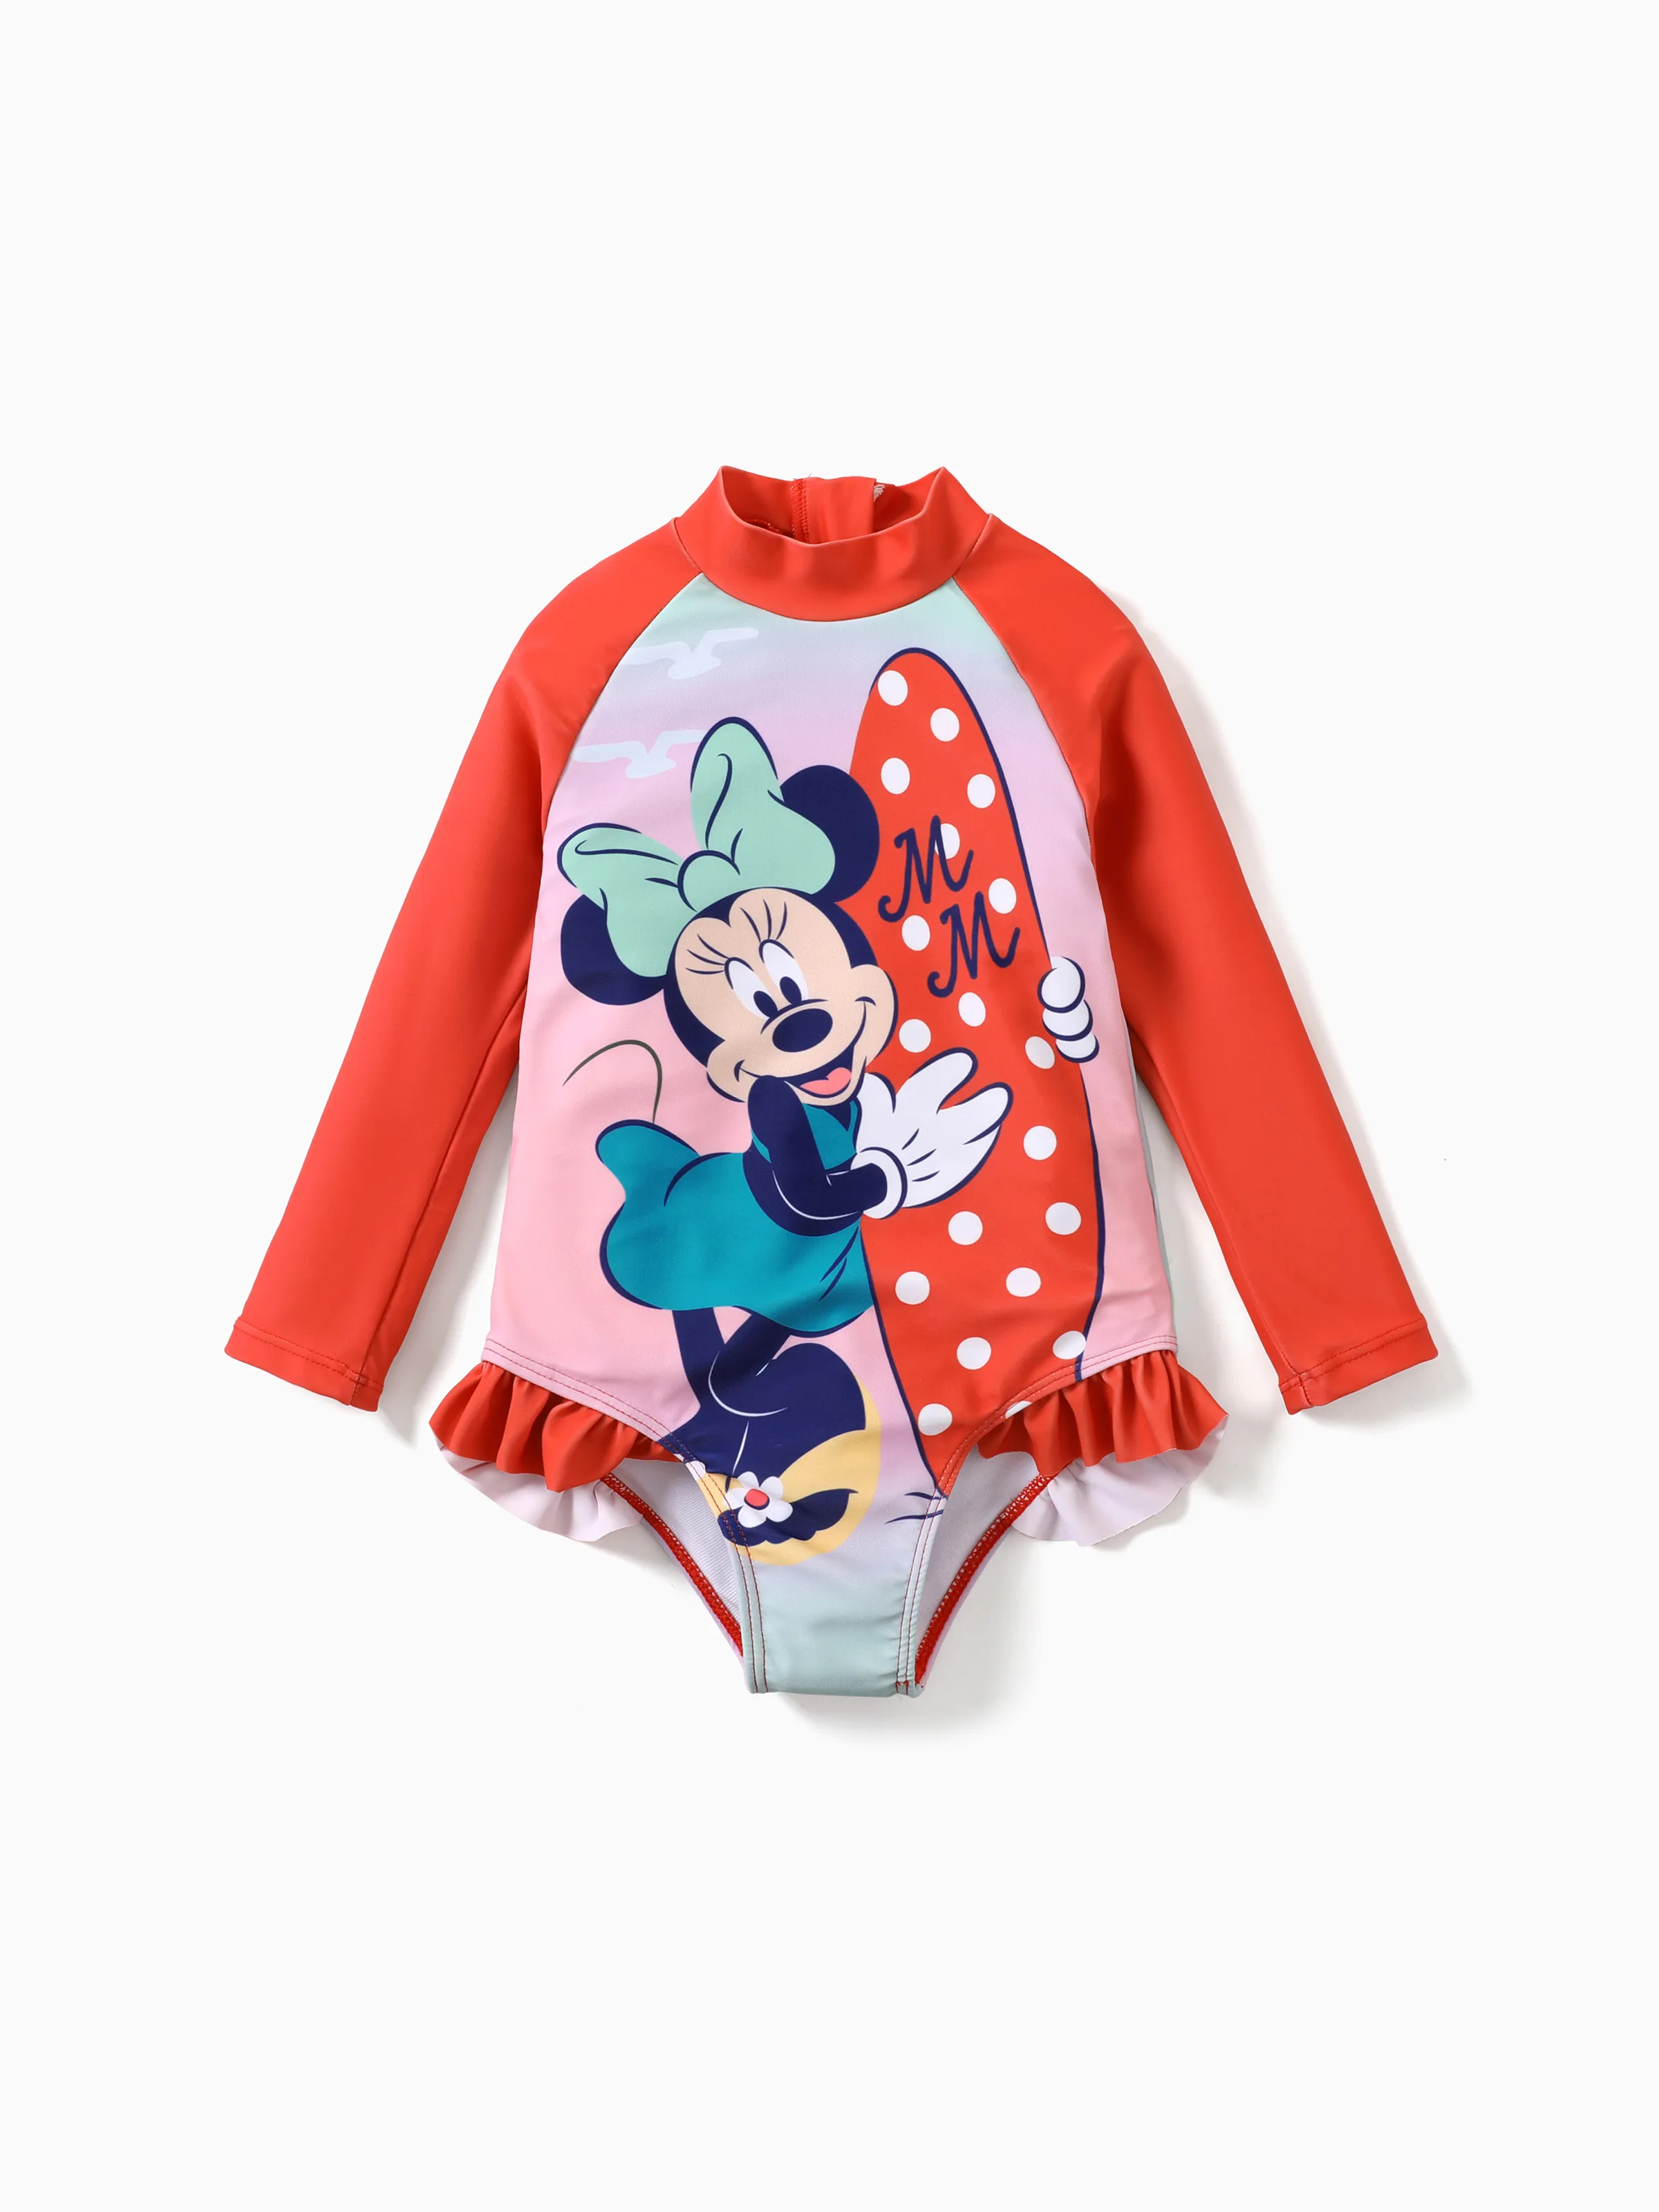 

Disney Mickey and Friends 1pc Toddler/Kids Girls Character Print Ruffled Long-Sleeve Swimsuit